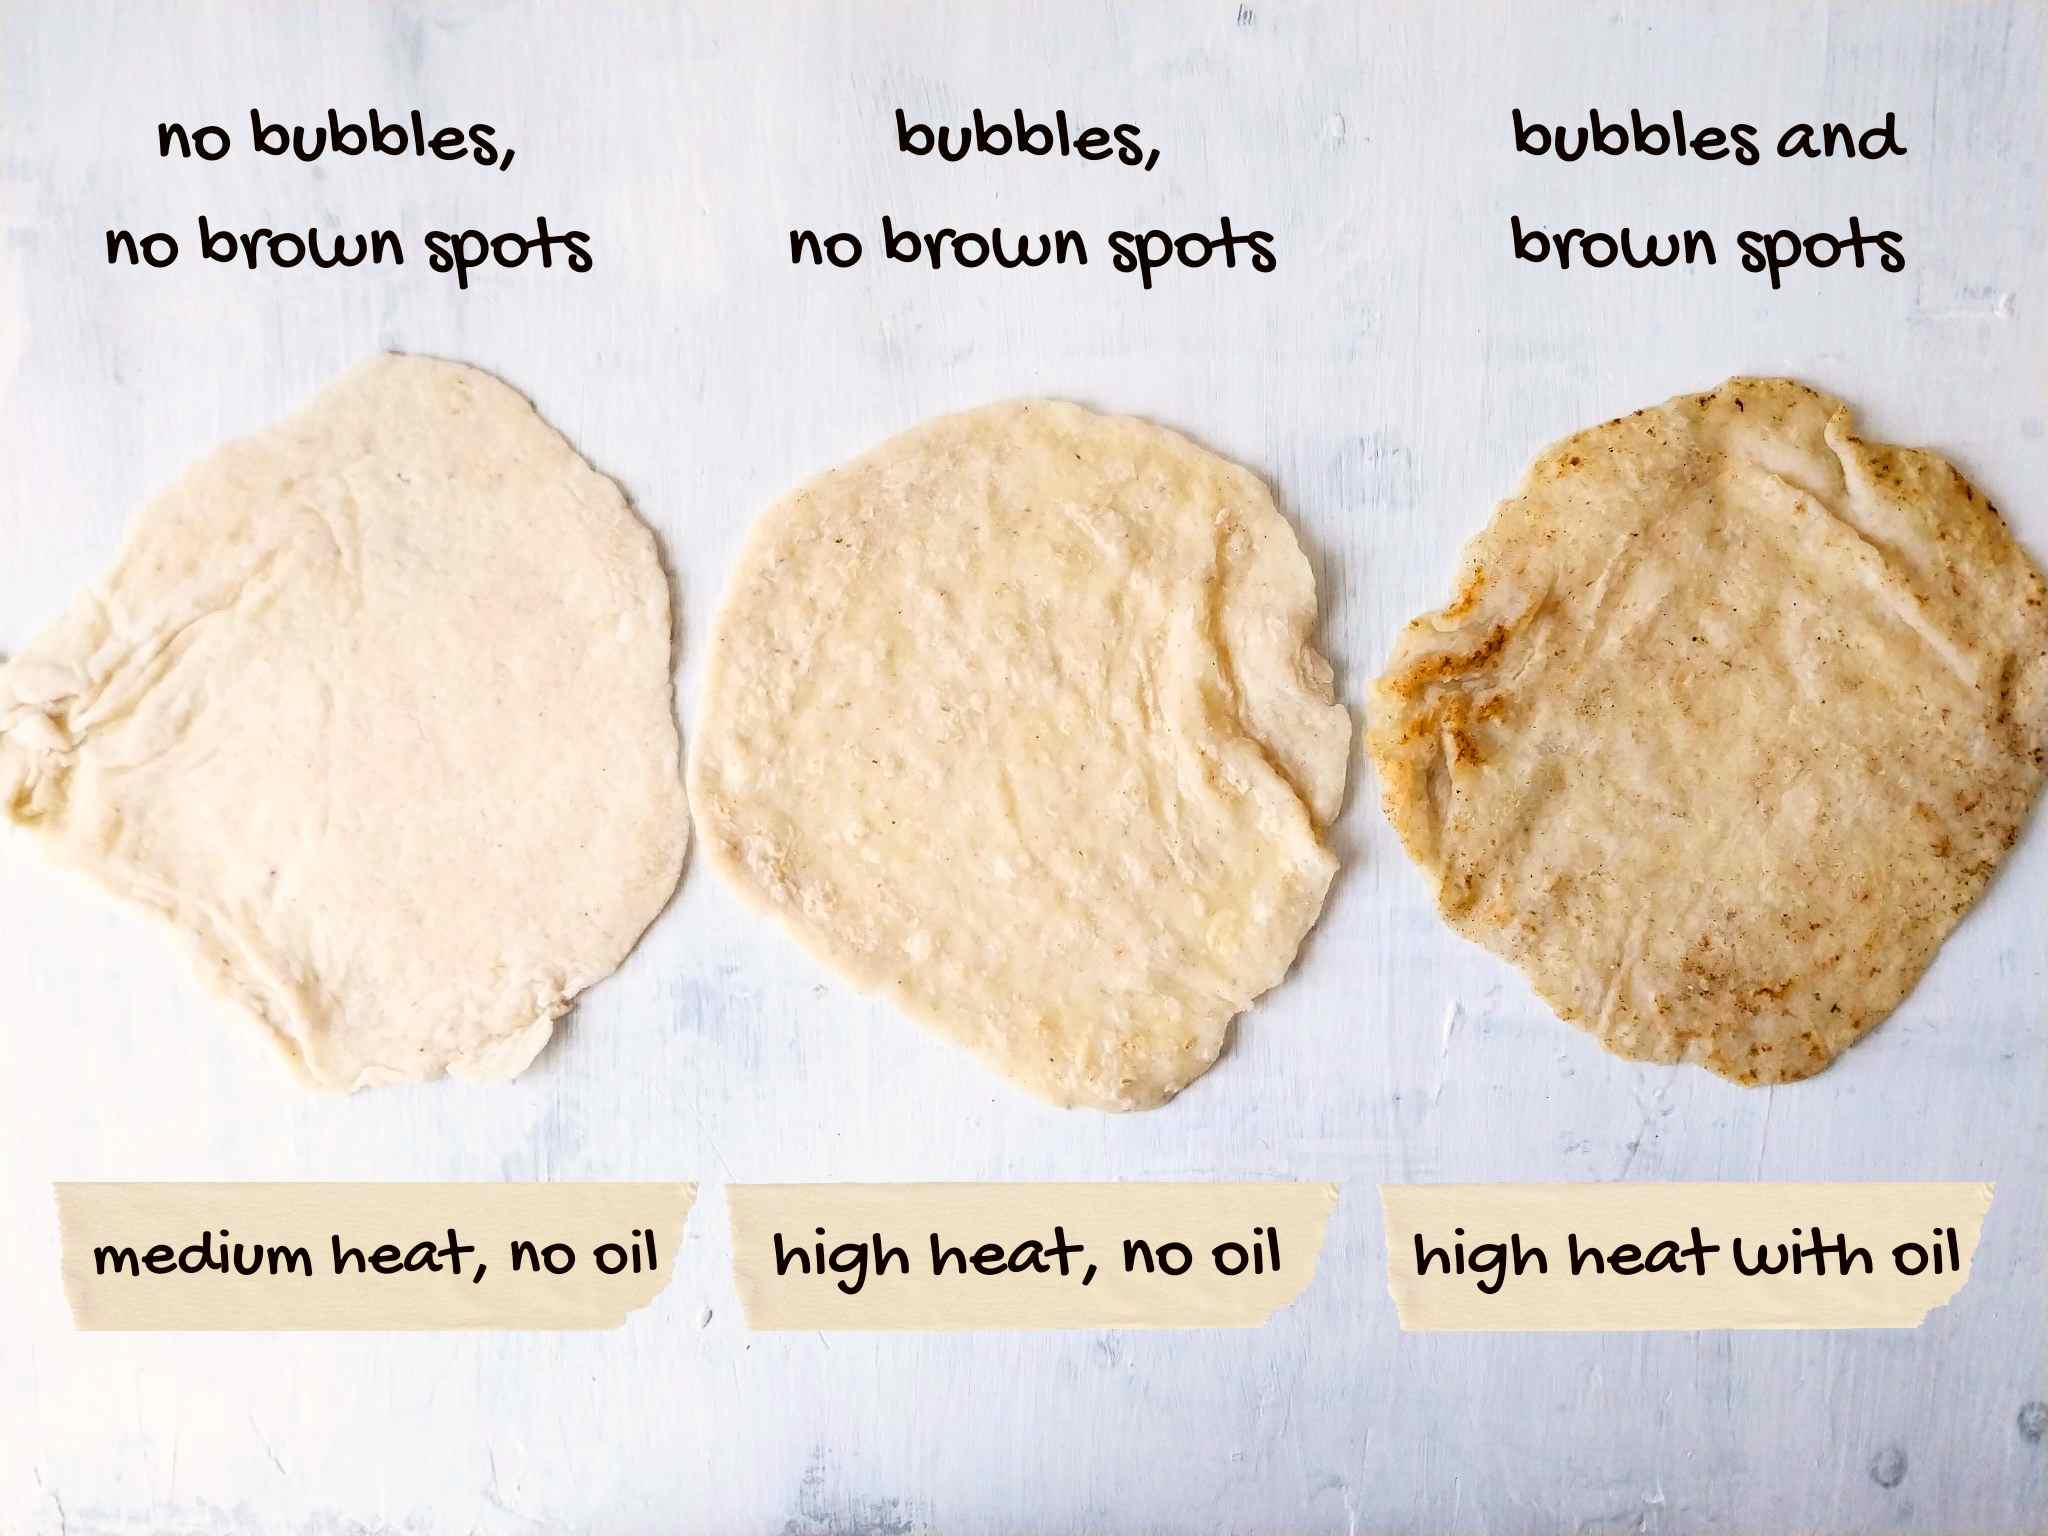 Three tortillas with different cooking heat and method compared.